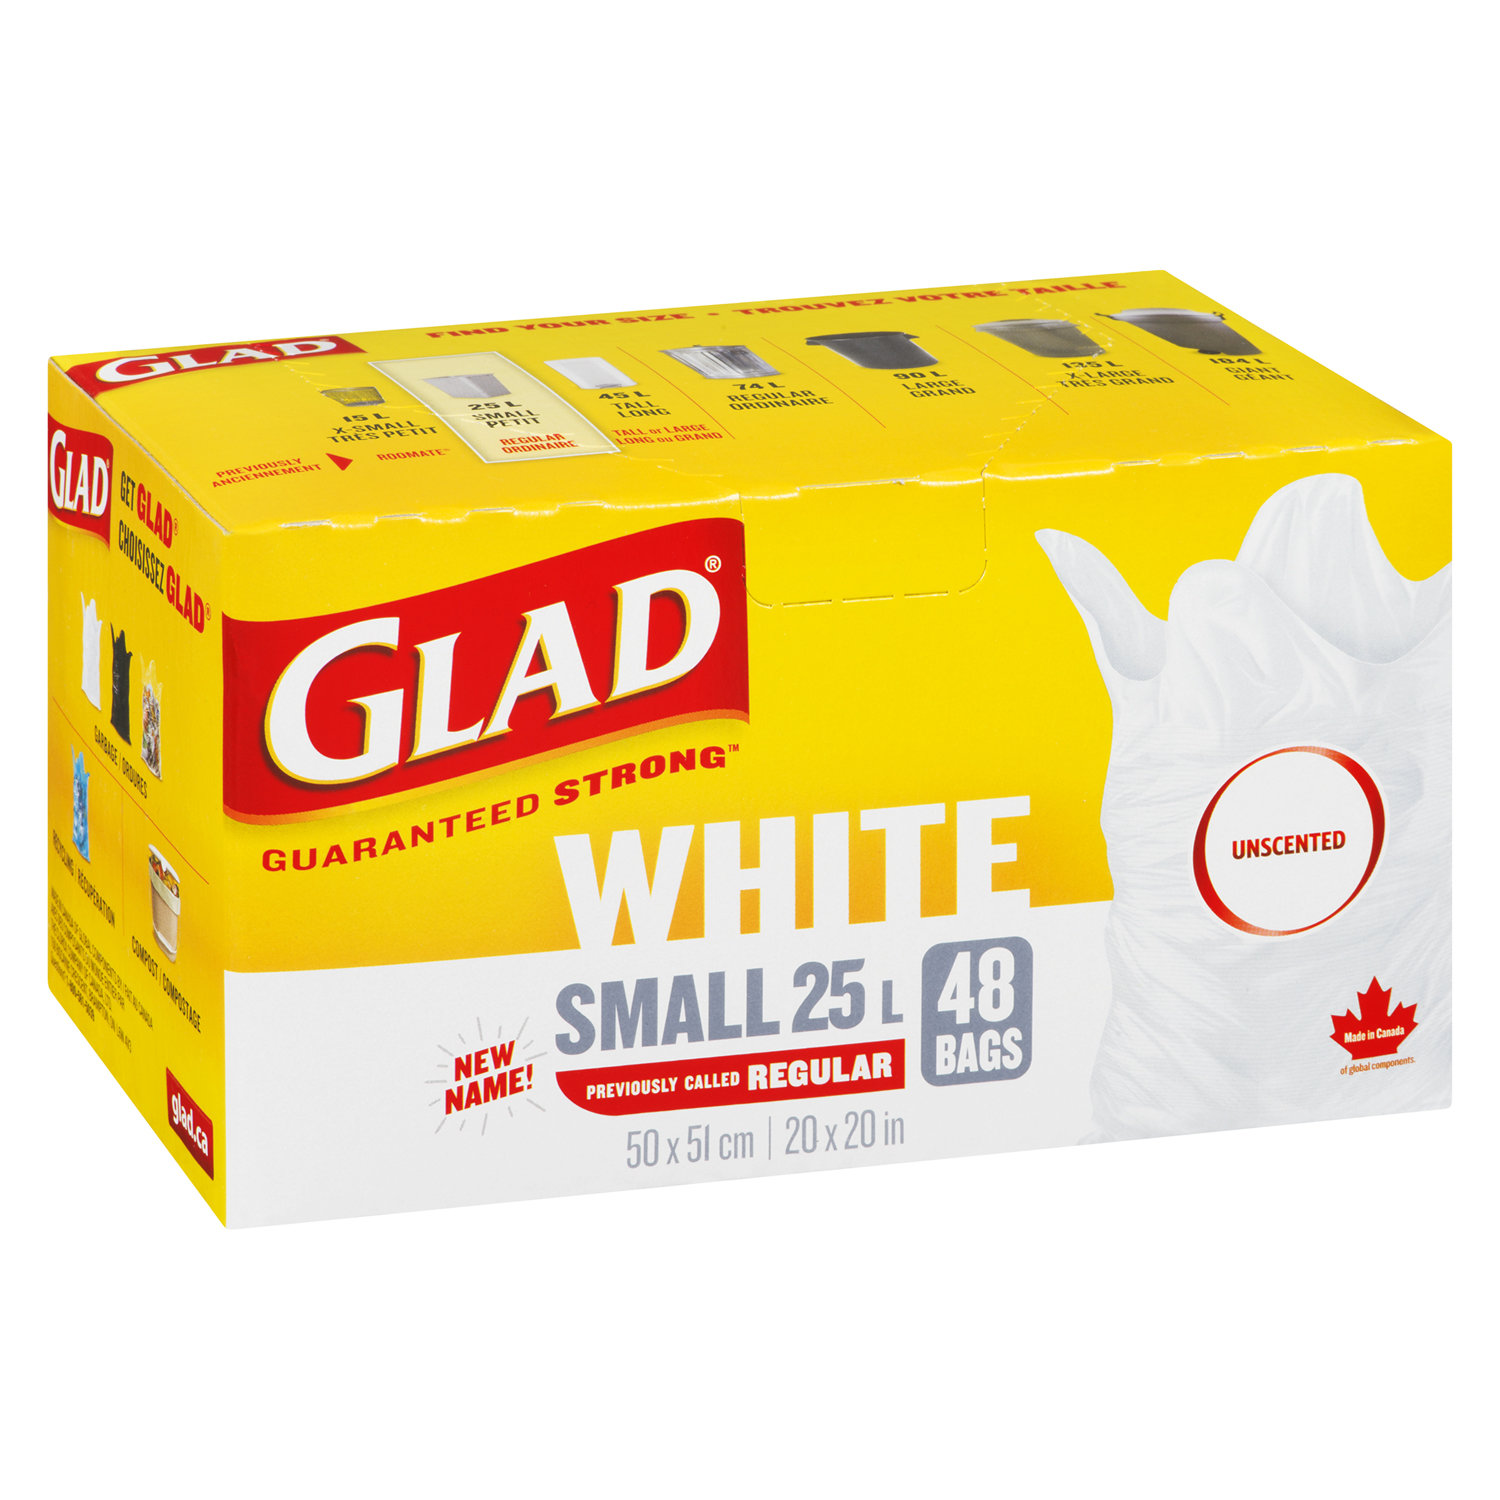 Glad - White Unscented Garbage Bags - Small